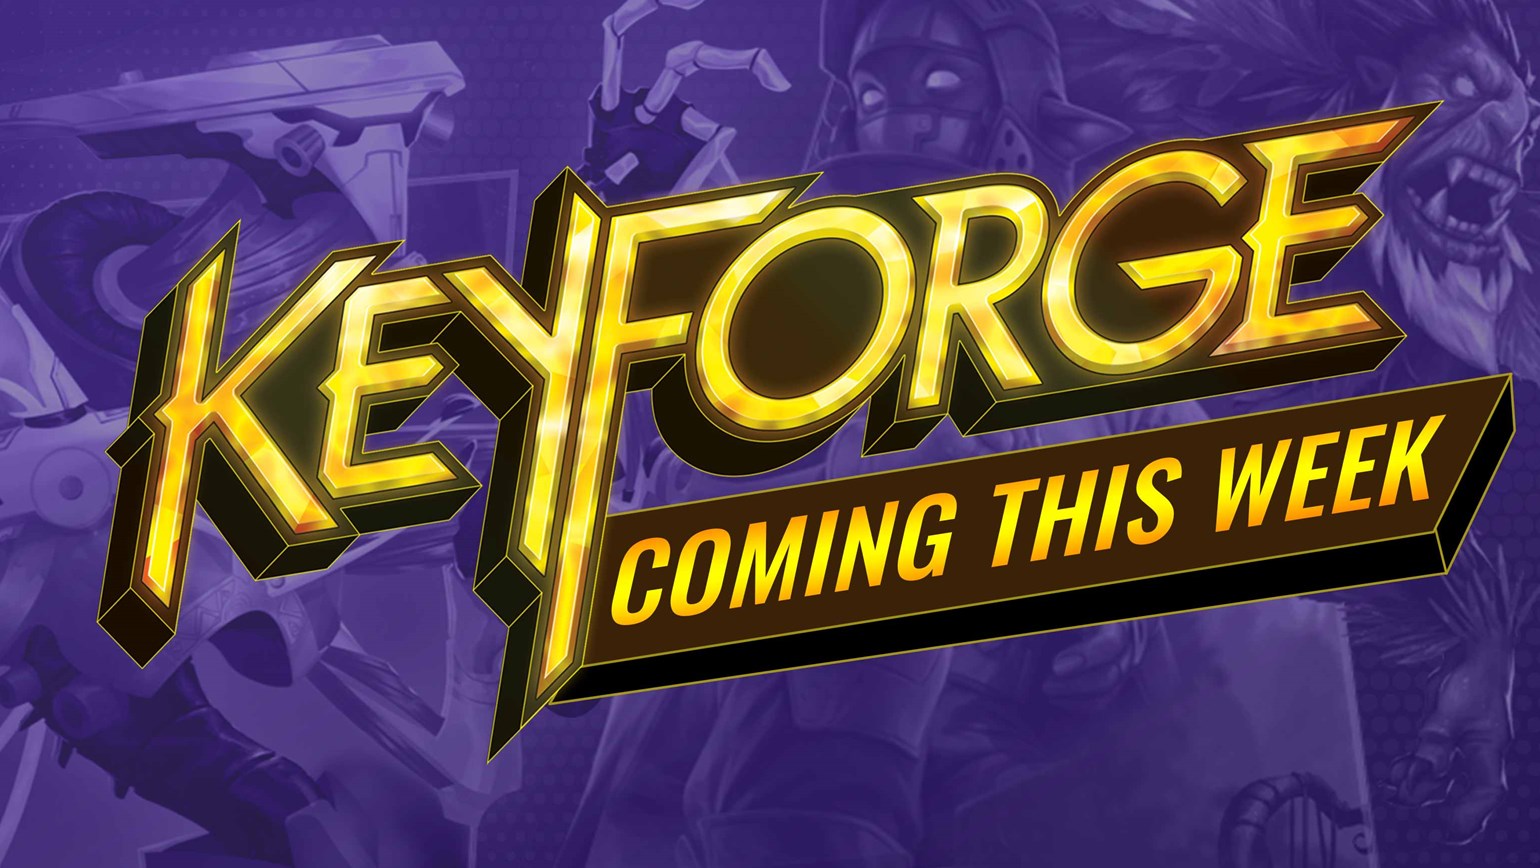 KeyForge Coming to TCGplayer This Week